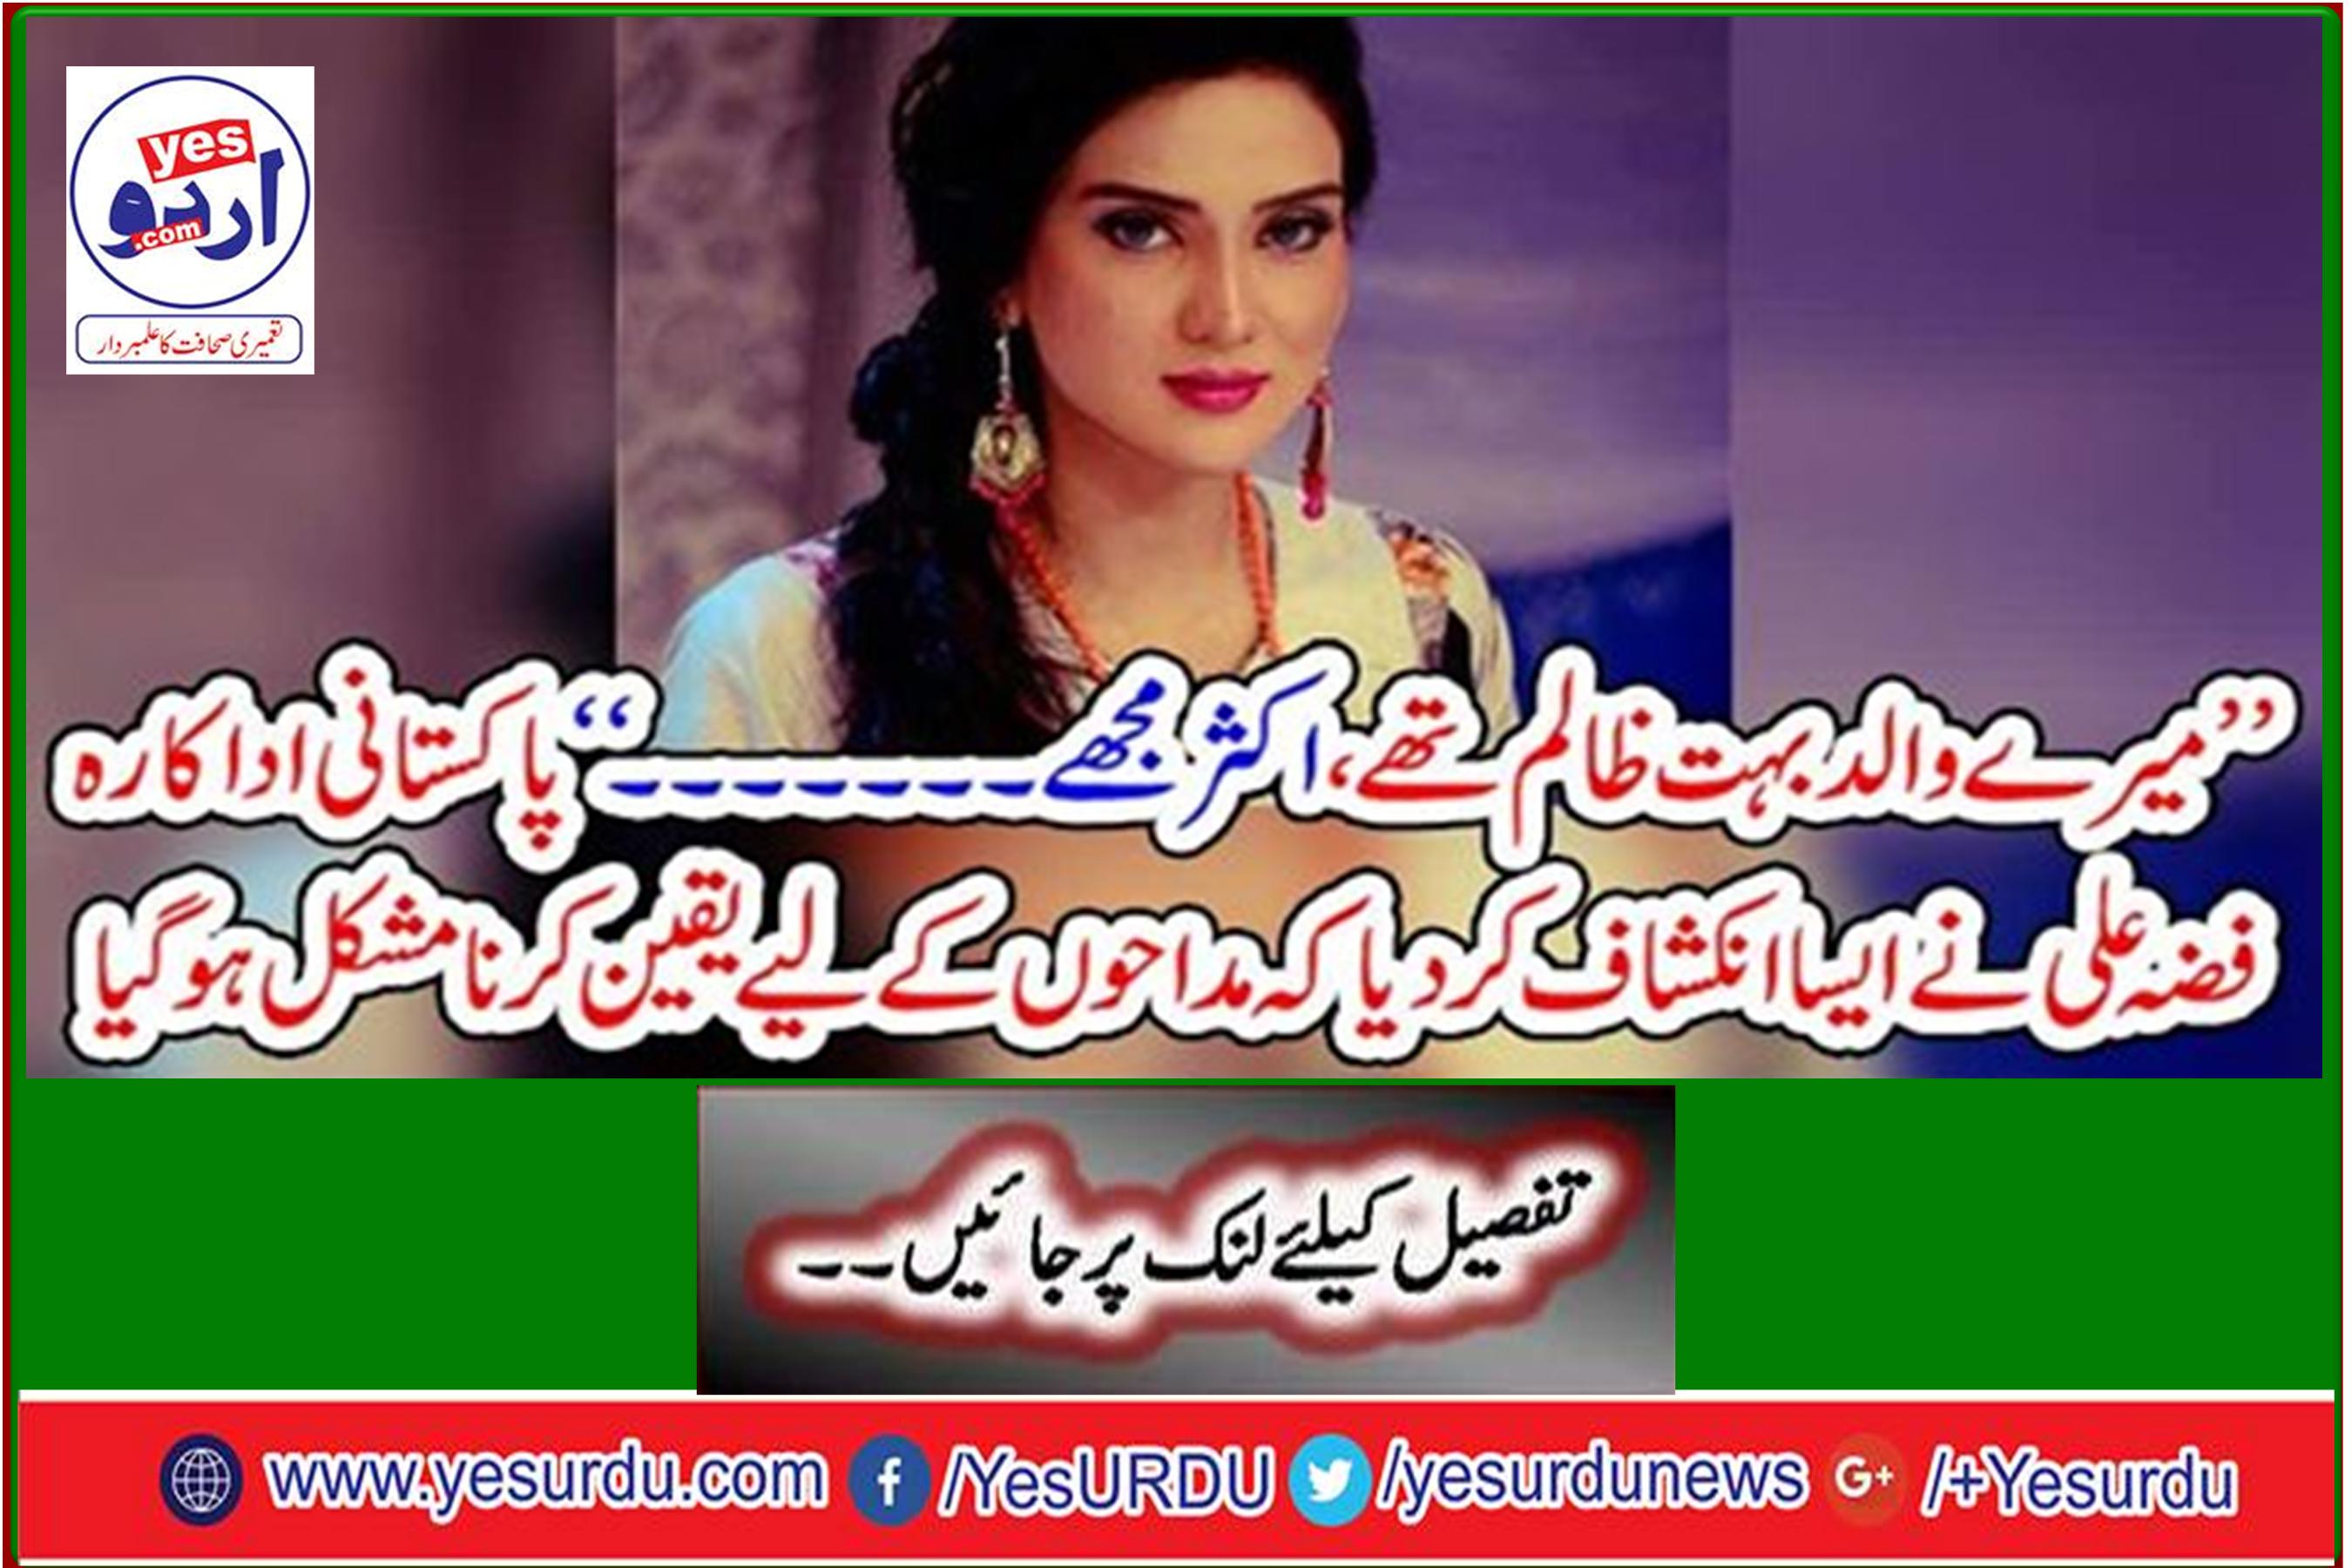 'Pakistani actress Faza Ali has revealed that it is difficult for fans to believe